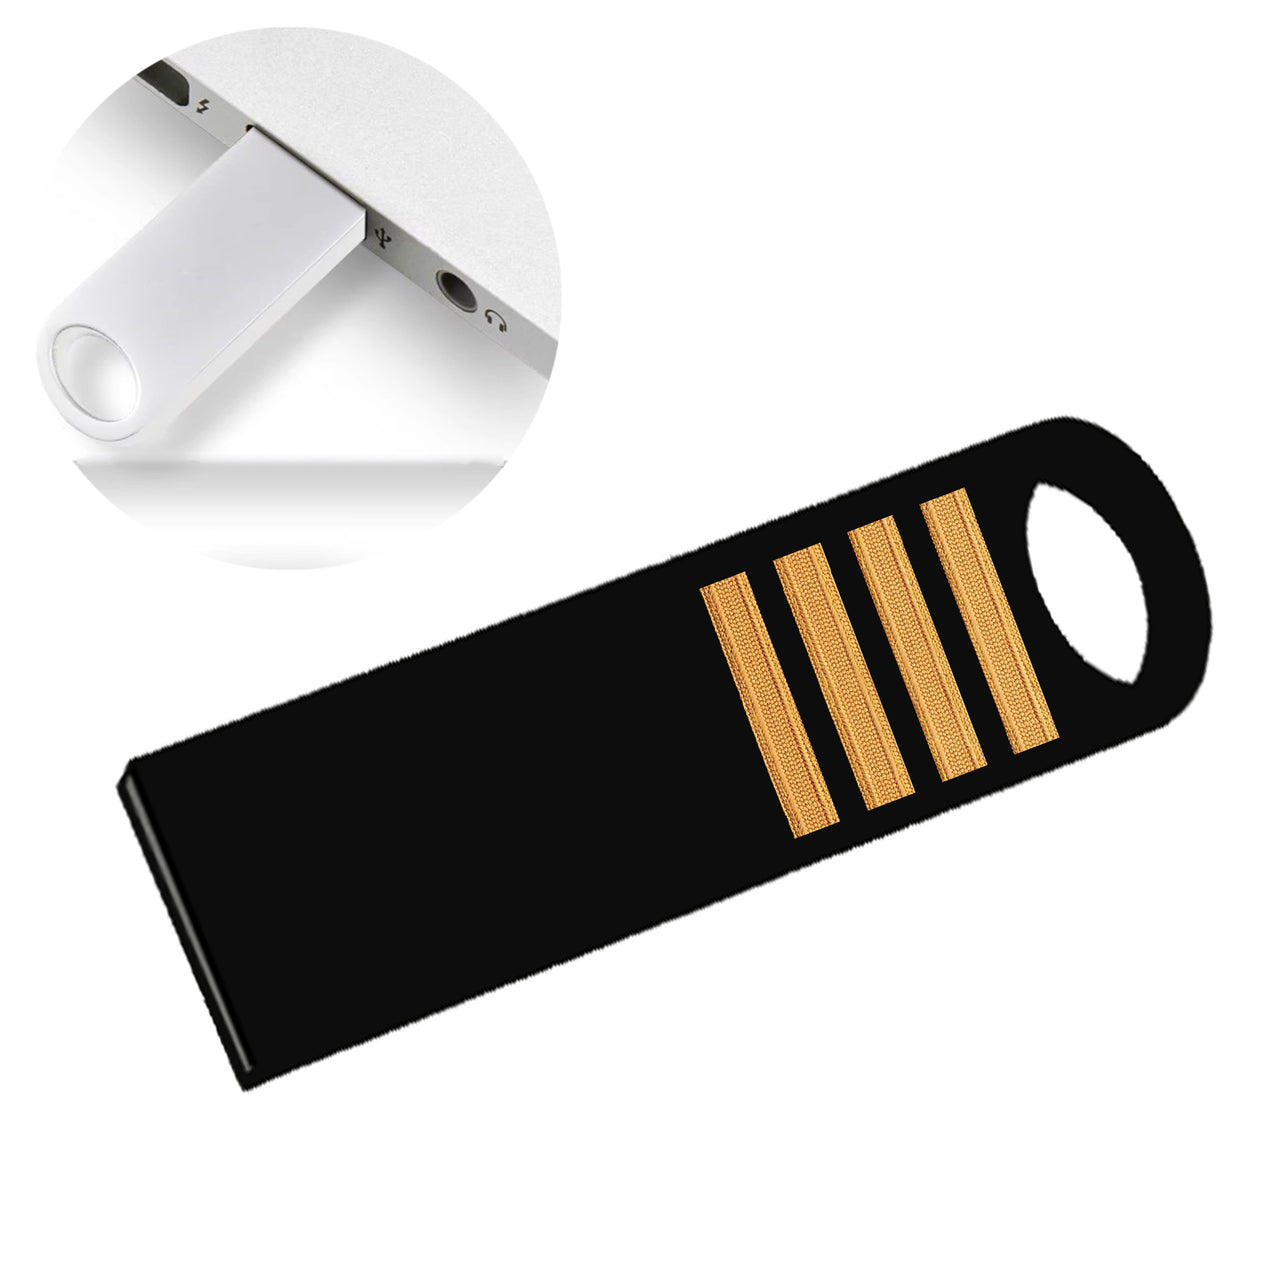 Special Golden Epaulettes (4,3,2 Lines) Designed Waterproof USB Devices